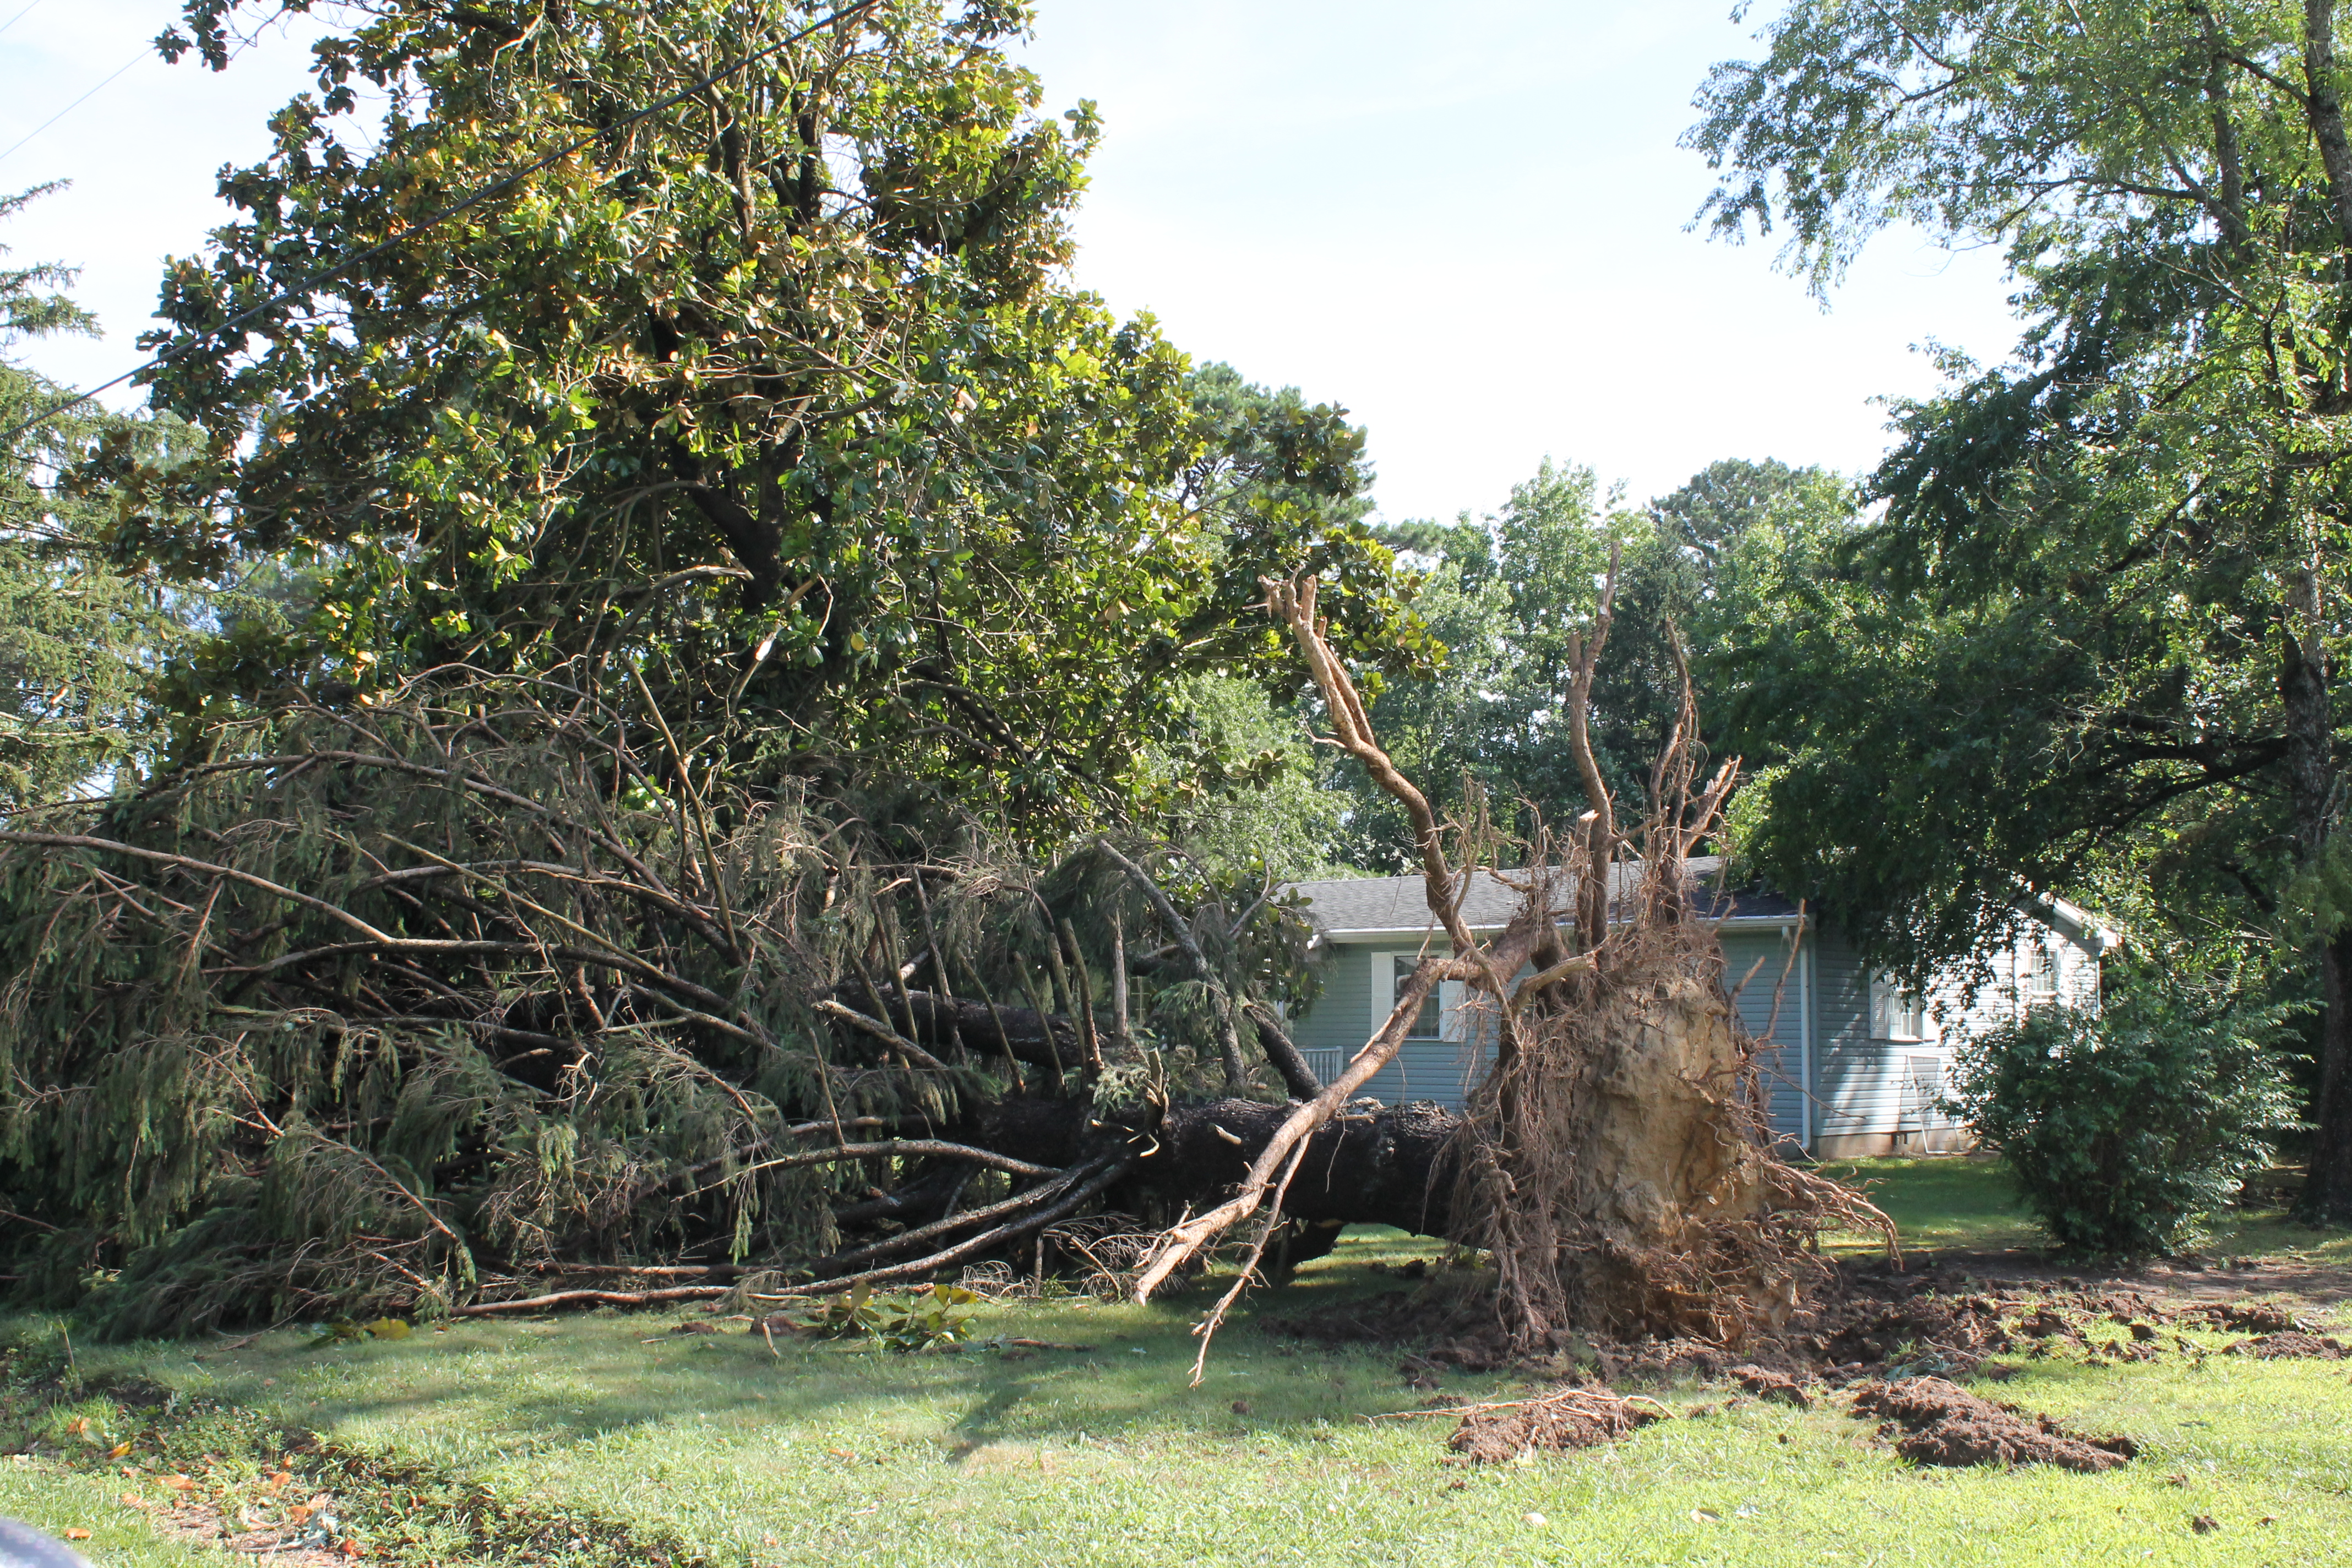 An EF0 tornado uprooted a treenear the Co-op headquarters in Greenwood.